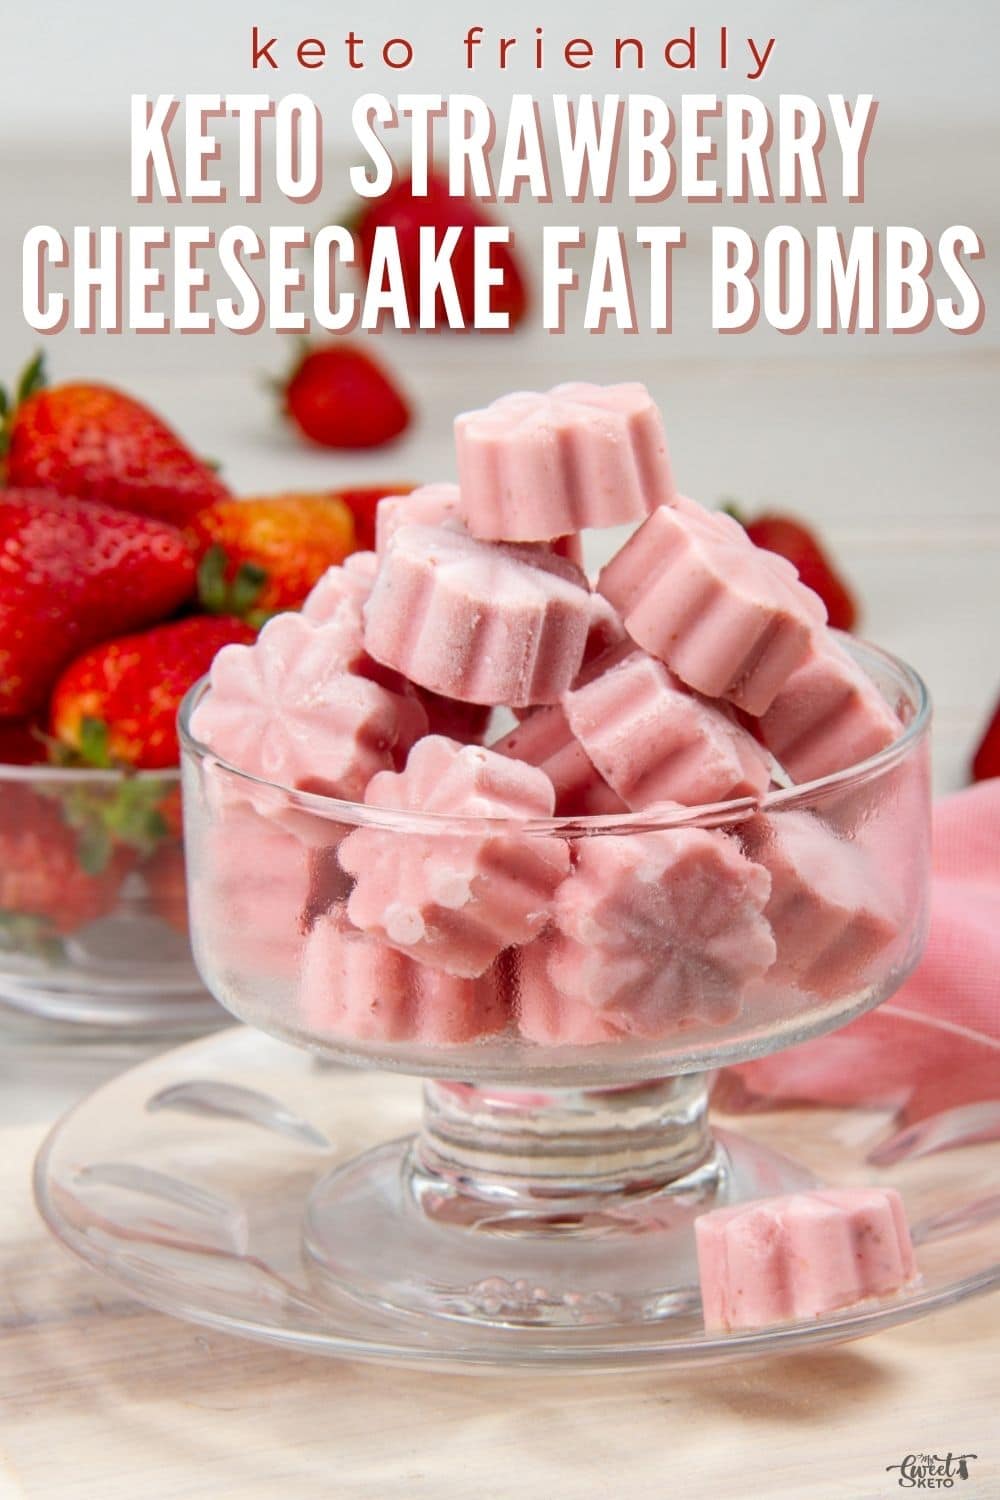 Five ingredients that, when combined, become the perfect keto strawberry cheesecake fat bombs — cold and delicate one-biters you won’t want to share. #keto #fatbombs